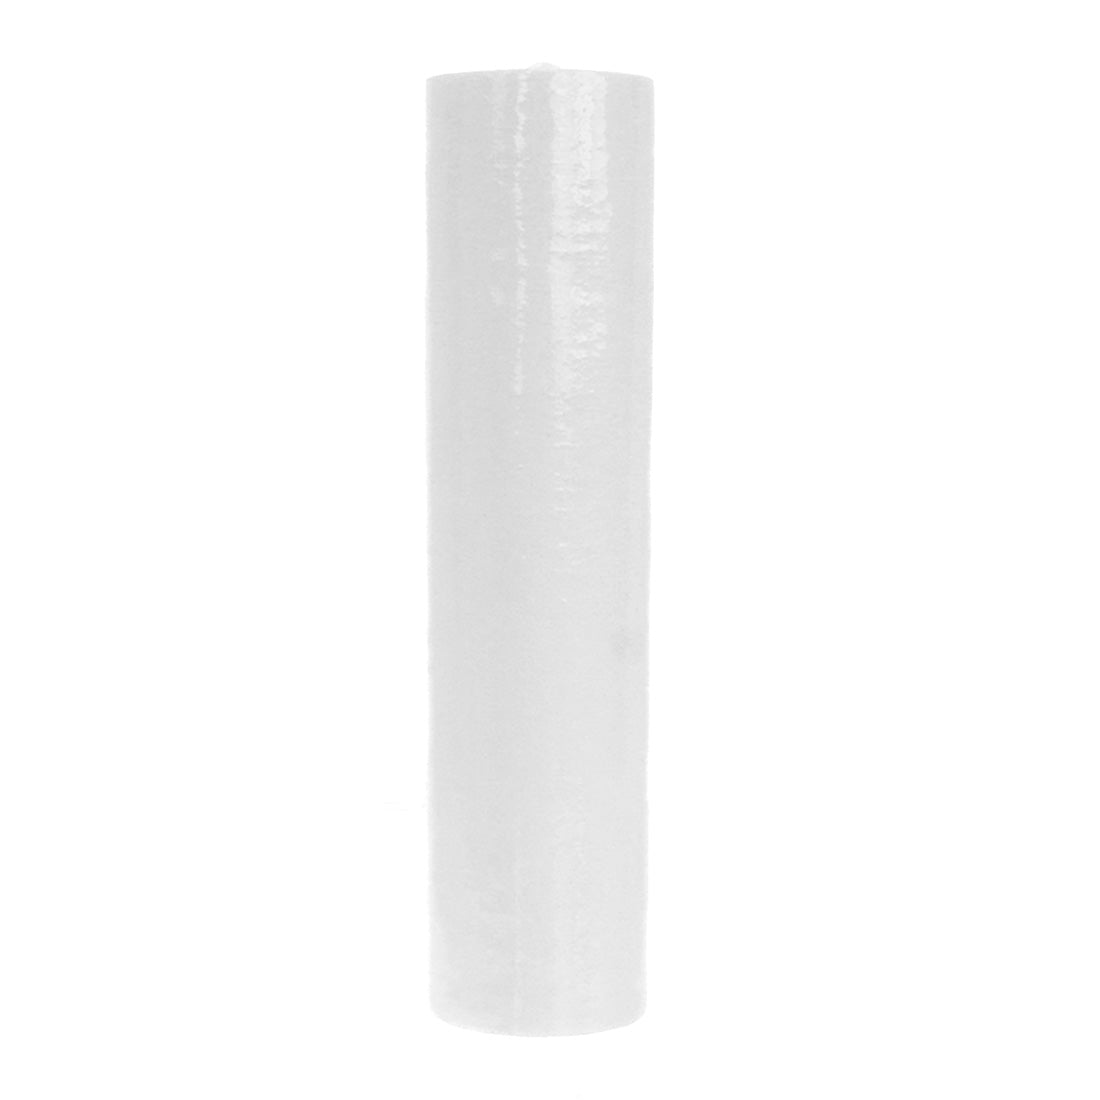 PWP Residential Kit Sediment Filter View